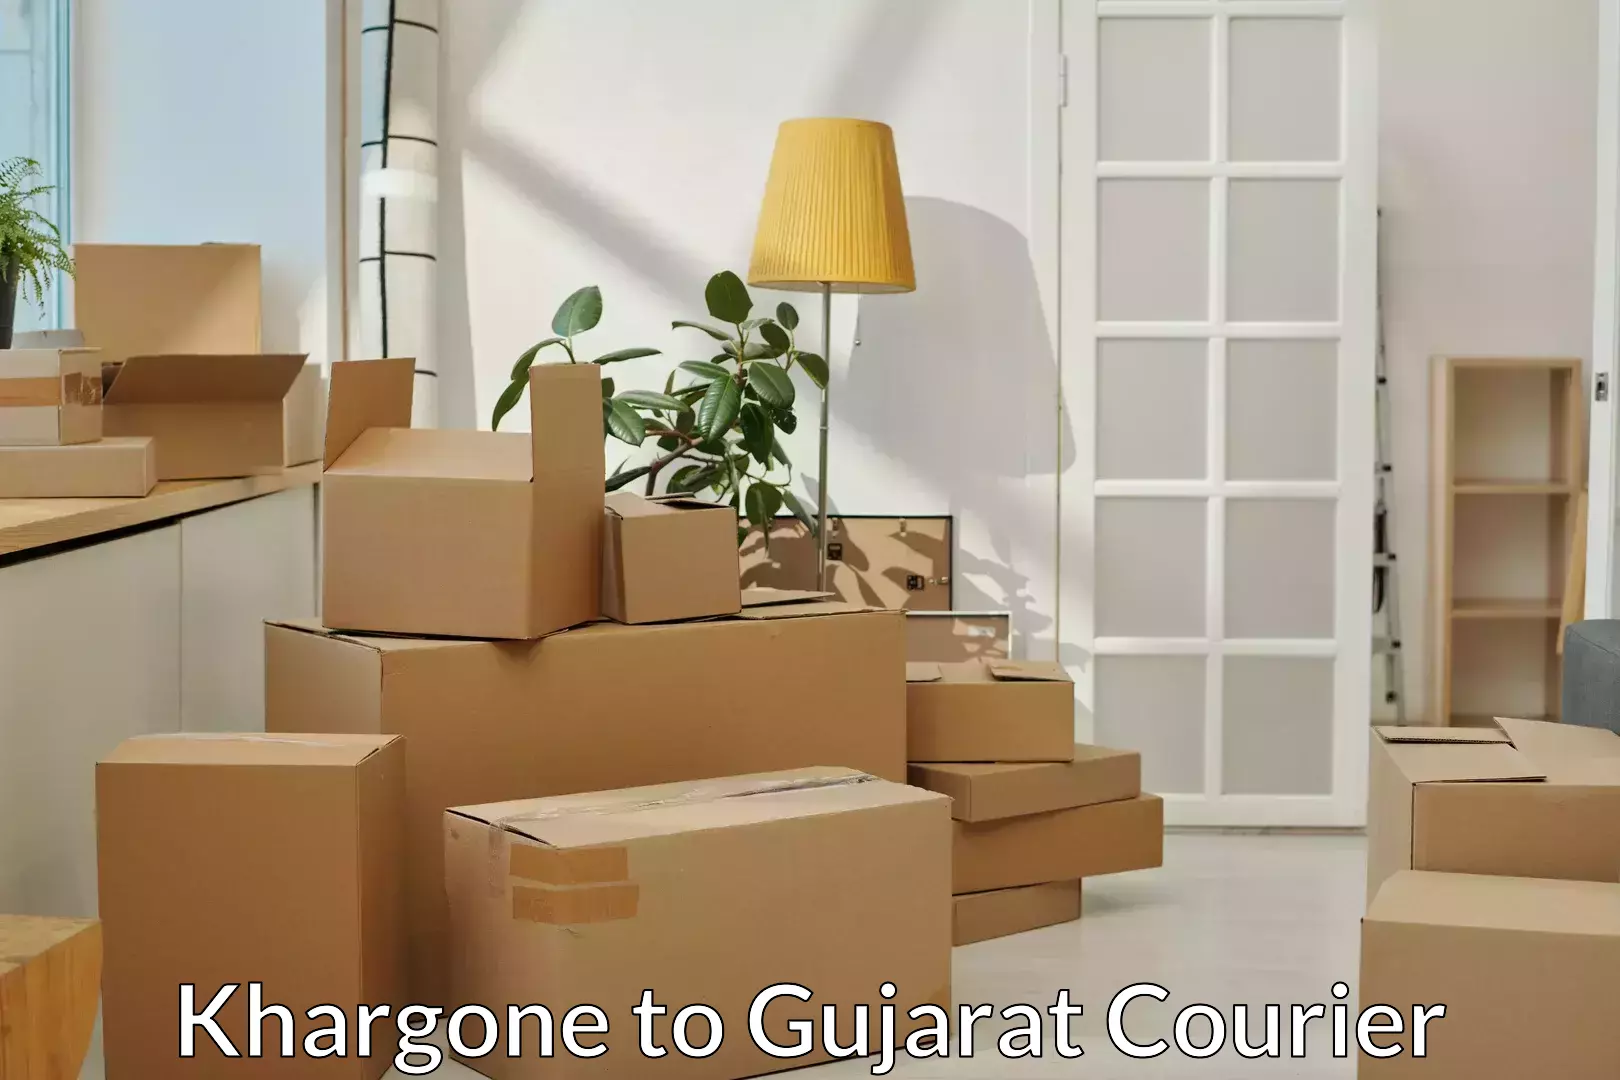 Trusted furniture transport Khargone to Ahmedabad